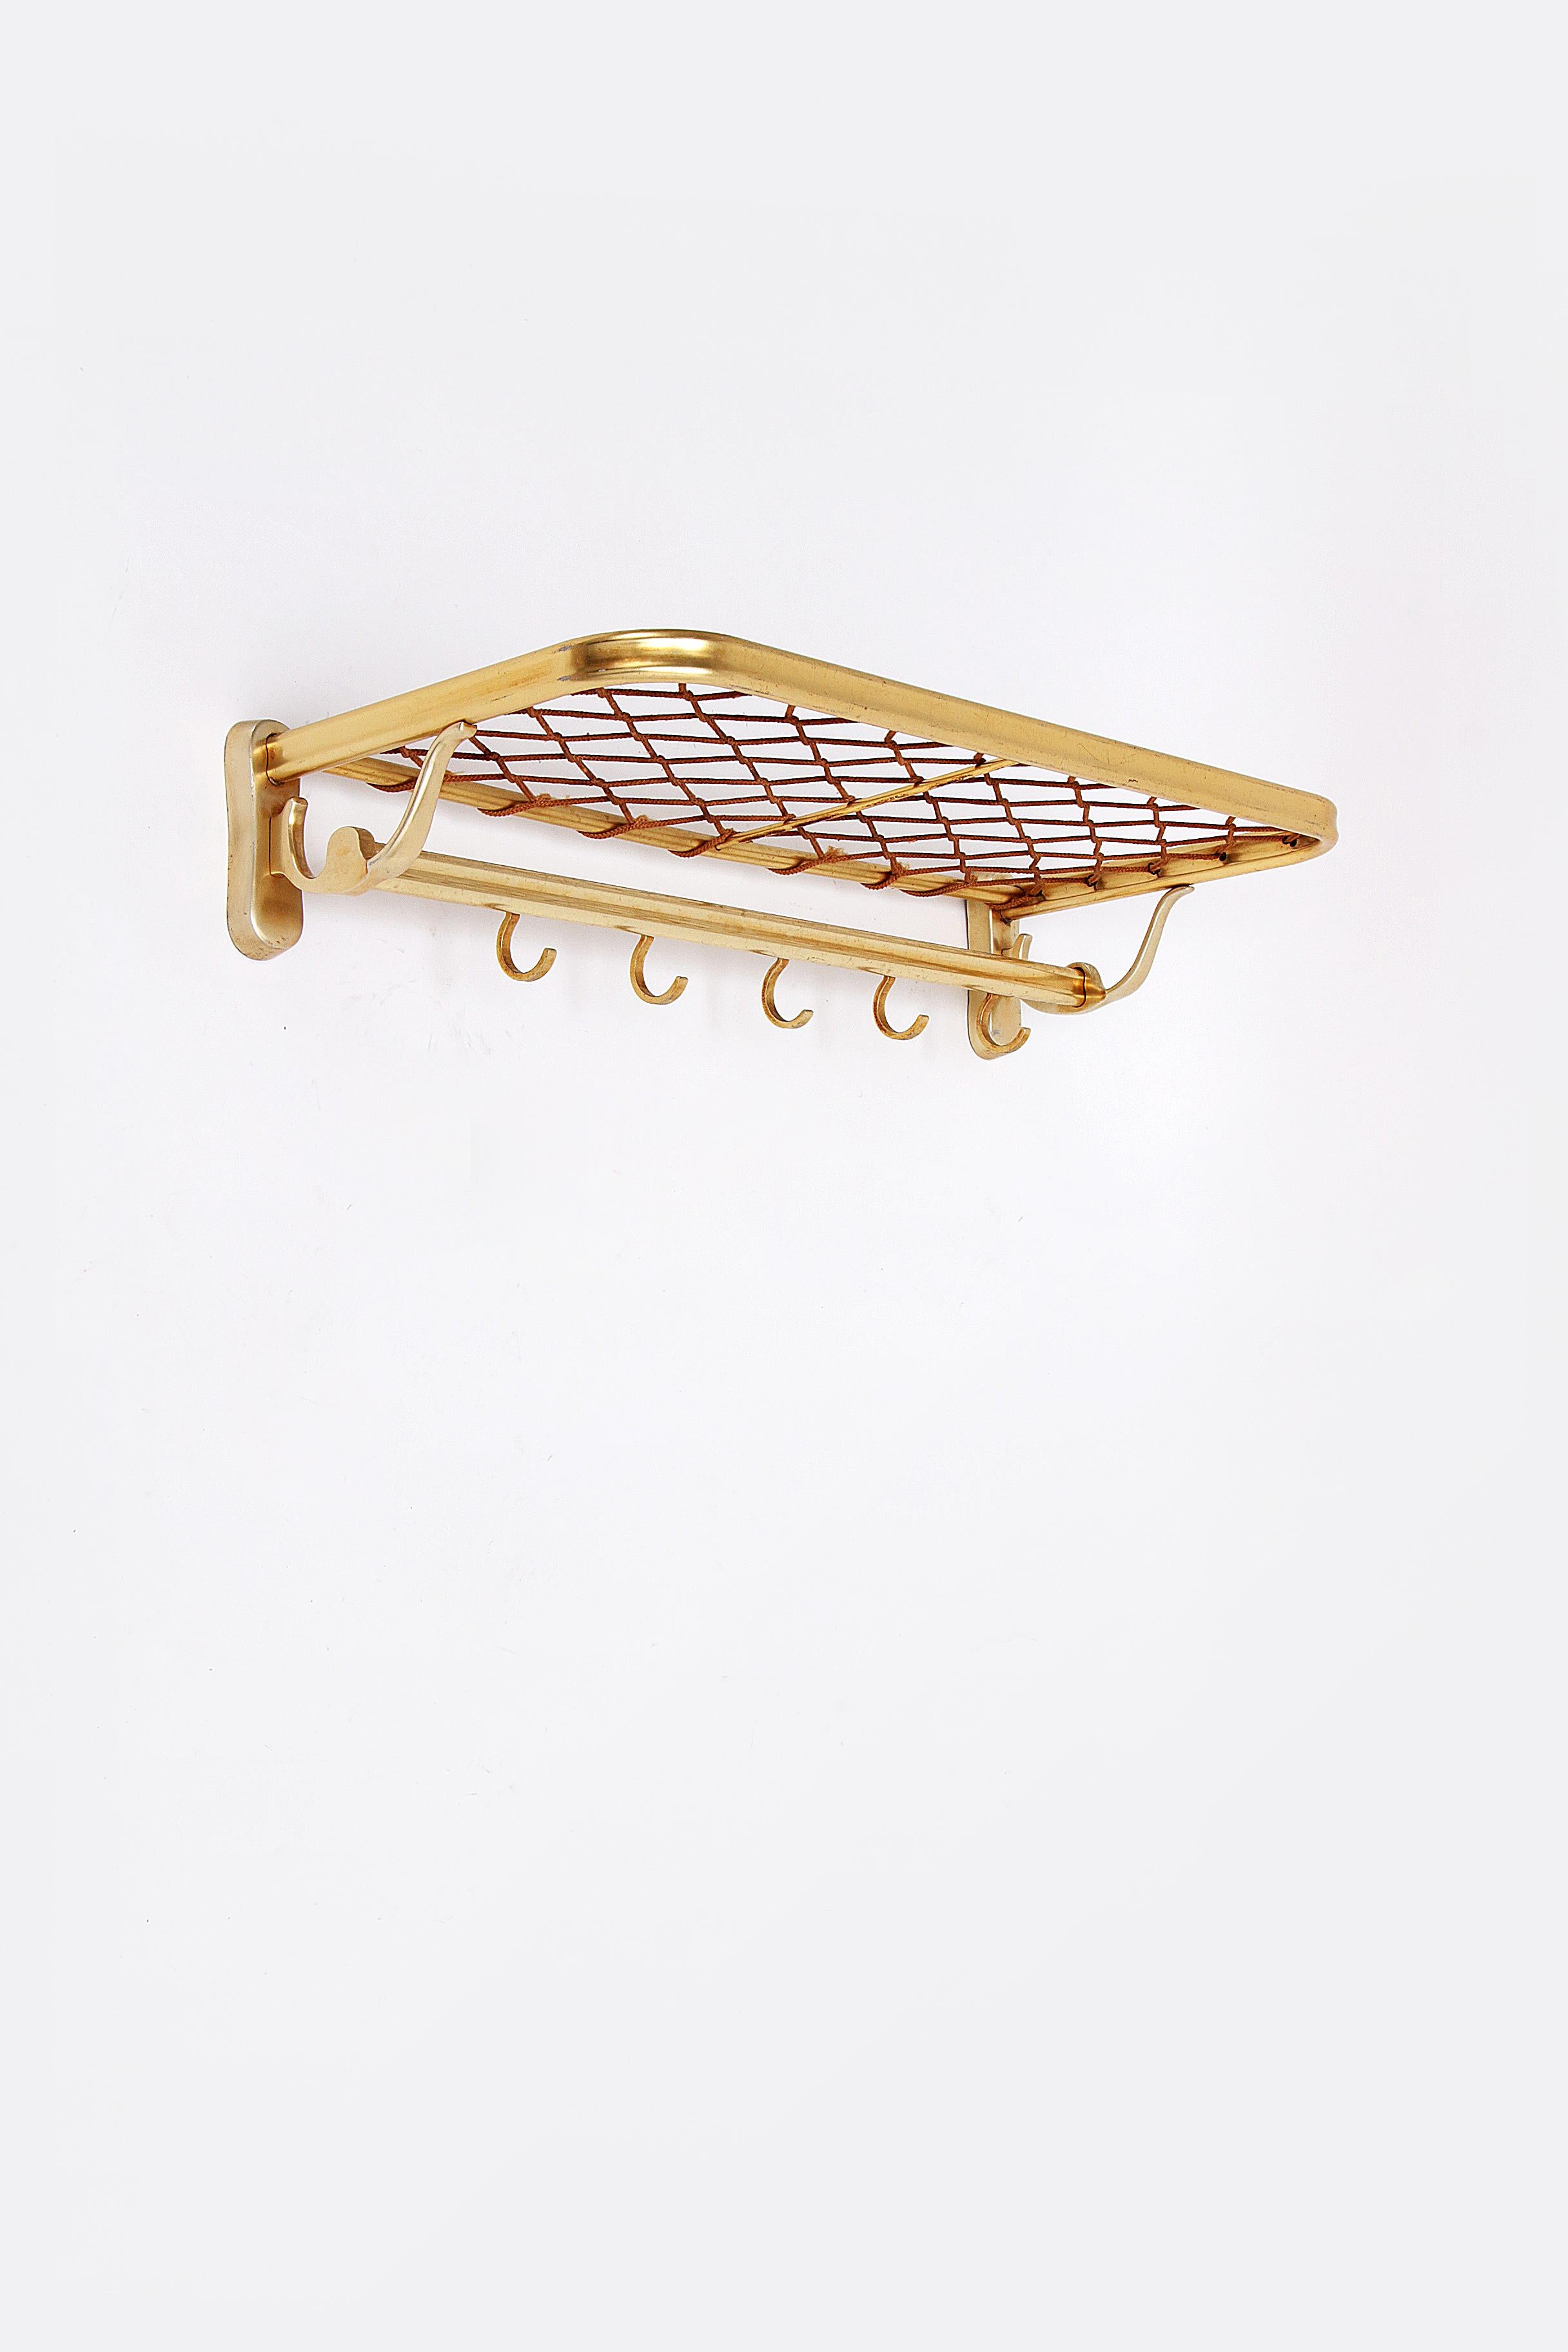 Vintage Hollywood Regency Wall Coat Rack 1960s Germany.

Aluminum gold colored coat rack from Germany.

There is an extra rack under the top rack, with 5 hooks.

There are signs of use on the wire.

Probably made in the 60s, now completely hip